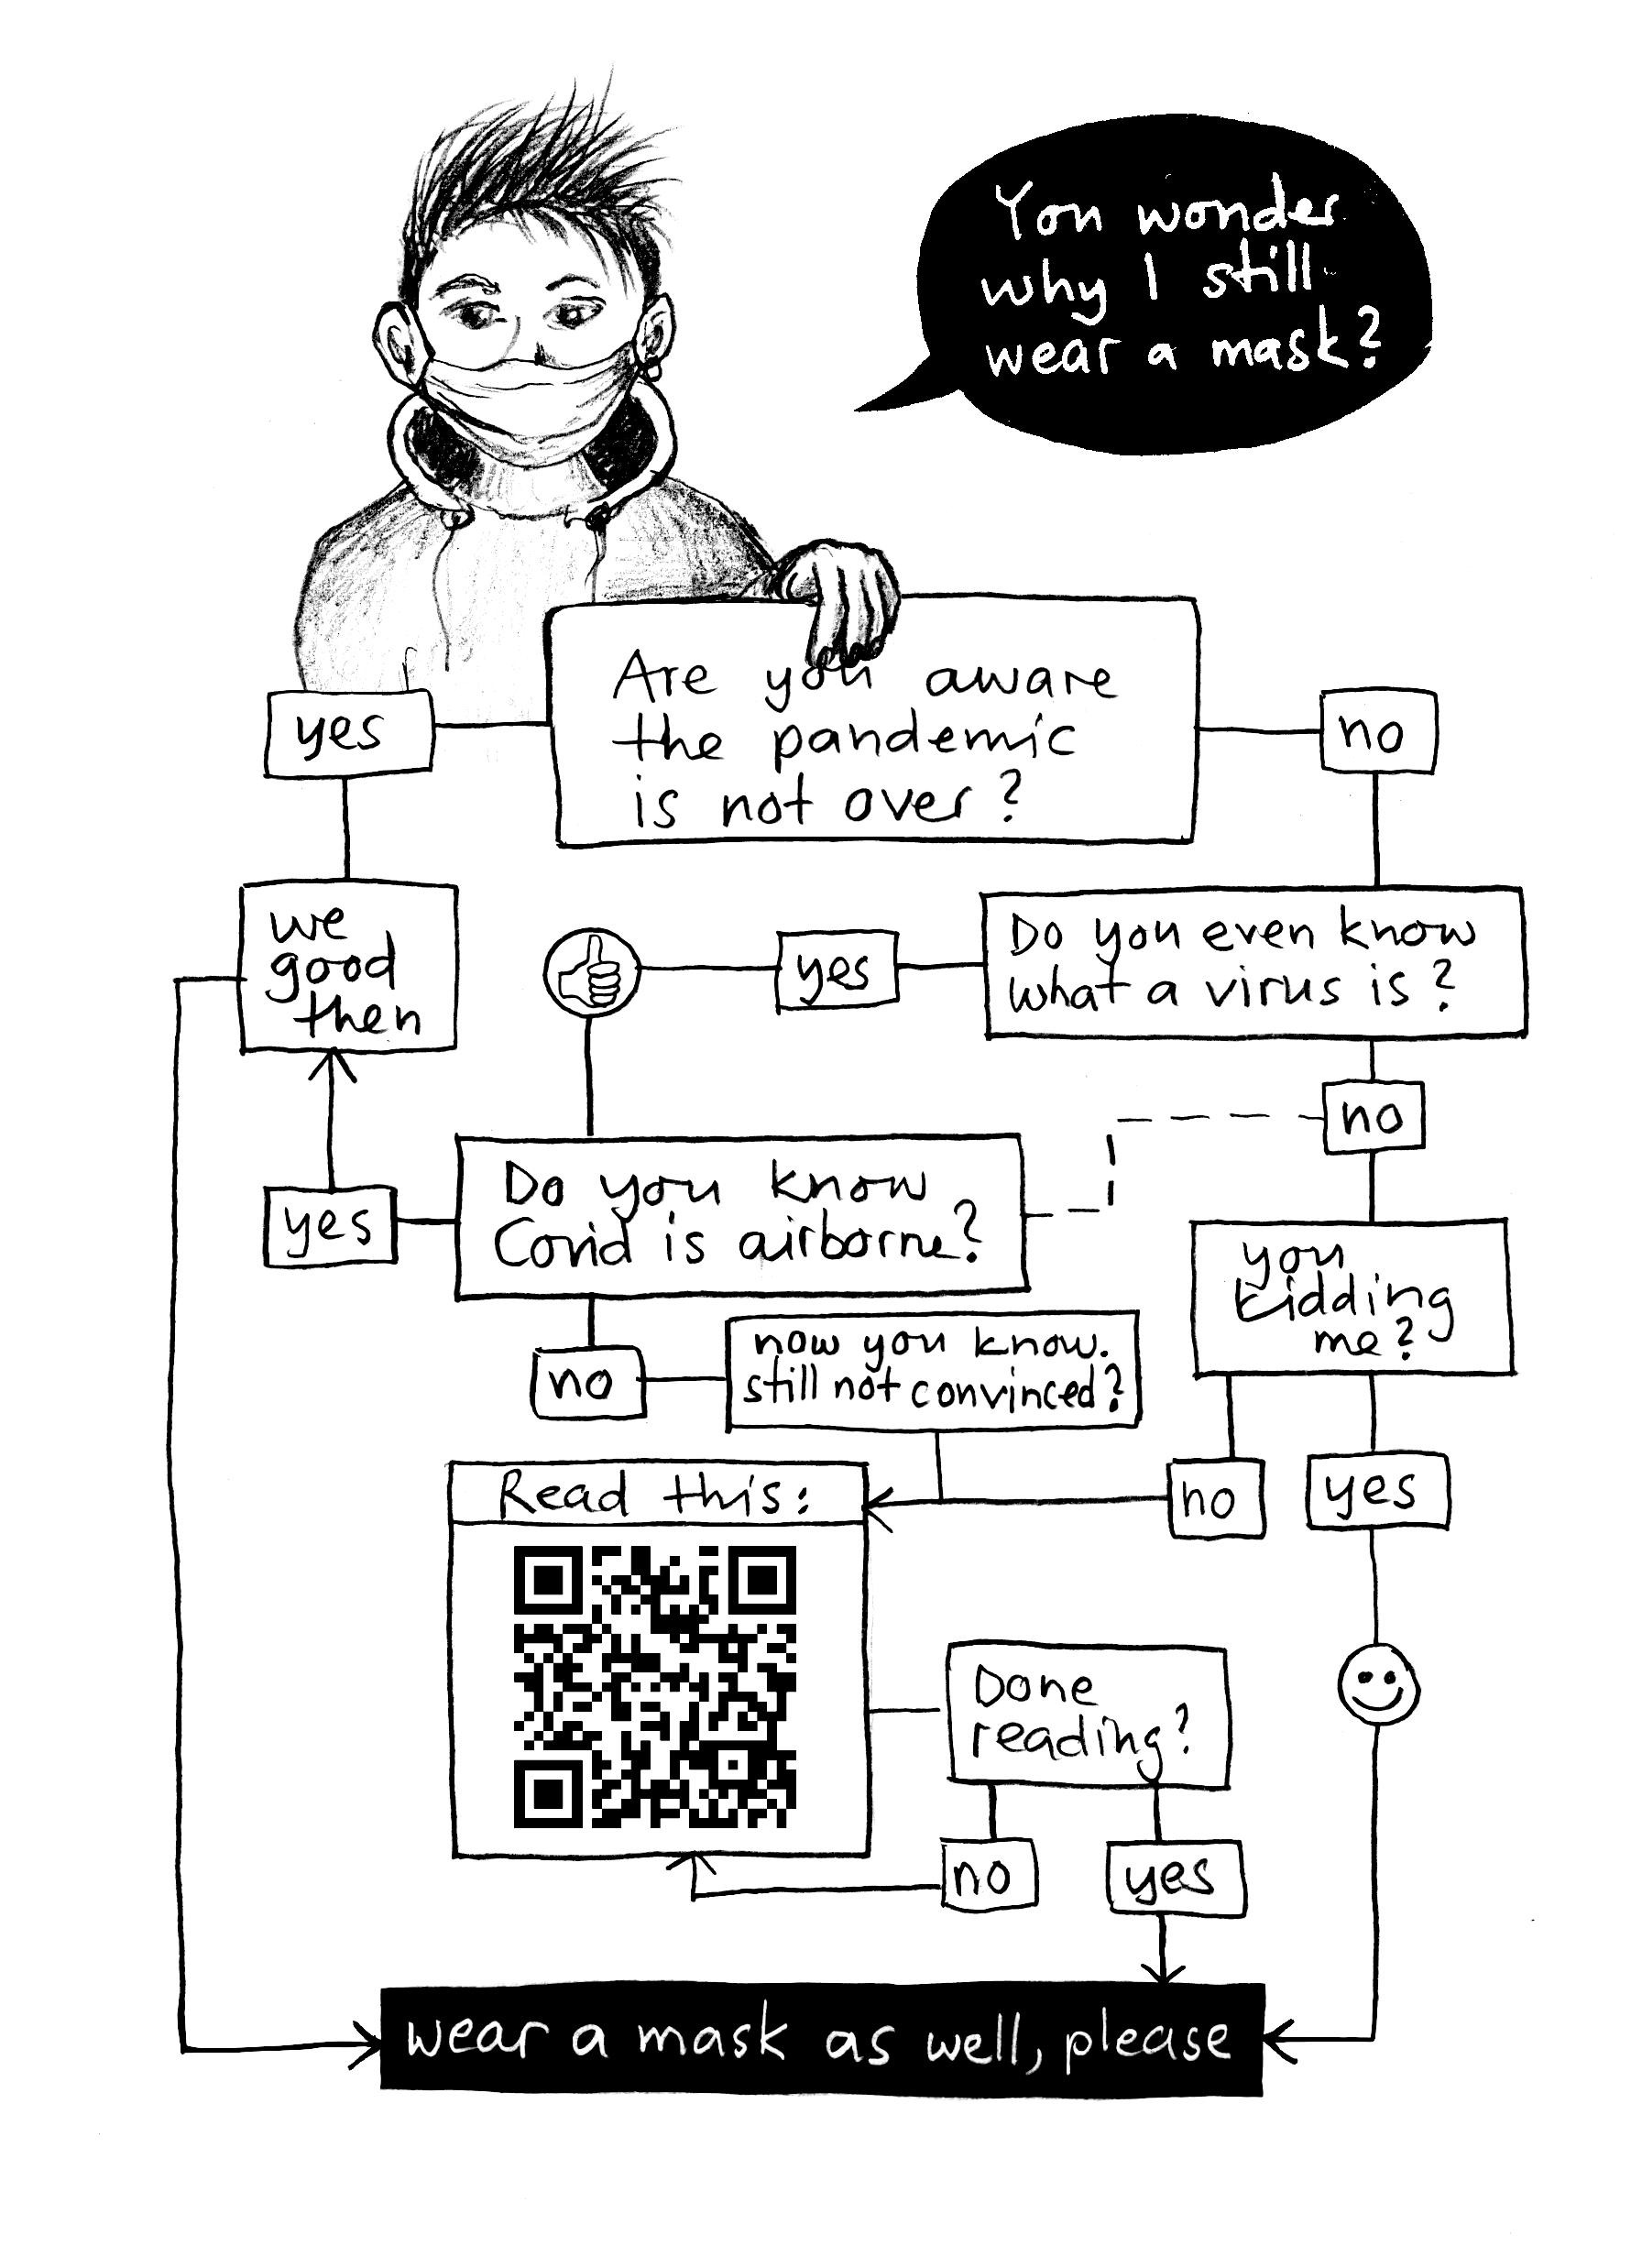 A black and white artwork depicting a short haired masked person and below them is a flowchart. It also has a QR code that links to the "An Open Letter to our Anarchist, Socialist and Radical Leftist Comrades". The person asks: You wonder why | still wear a mask?? Start of the flowchart: Are you aware the pandemic is not over? options : Yes/No If yes - we good then - wear a mask as well please (last field of flowchart) If no - Do you even know what a a virus is? - If yes- thumbs up emoji - do you know covid is airborne? yes/no if yes -- wear a mask if no-now you know. Still not convinced? Read this - qr code If you do not know what a virus is - you kidding me? - yes - smiley face - wear a mask If you were not kidding- read this - qr code Done reading? no? back to gr code. Yes? Wear a mask as well please